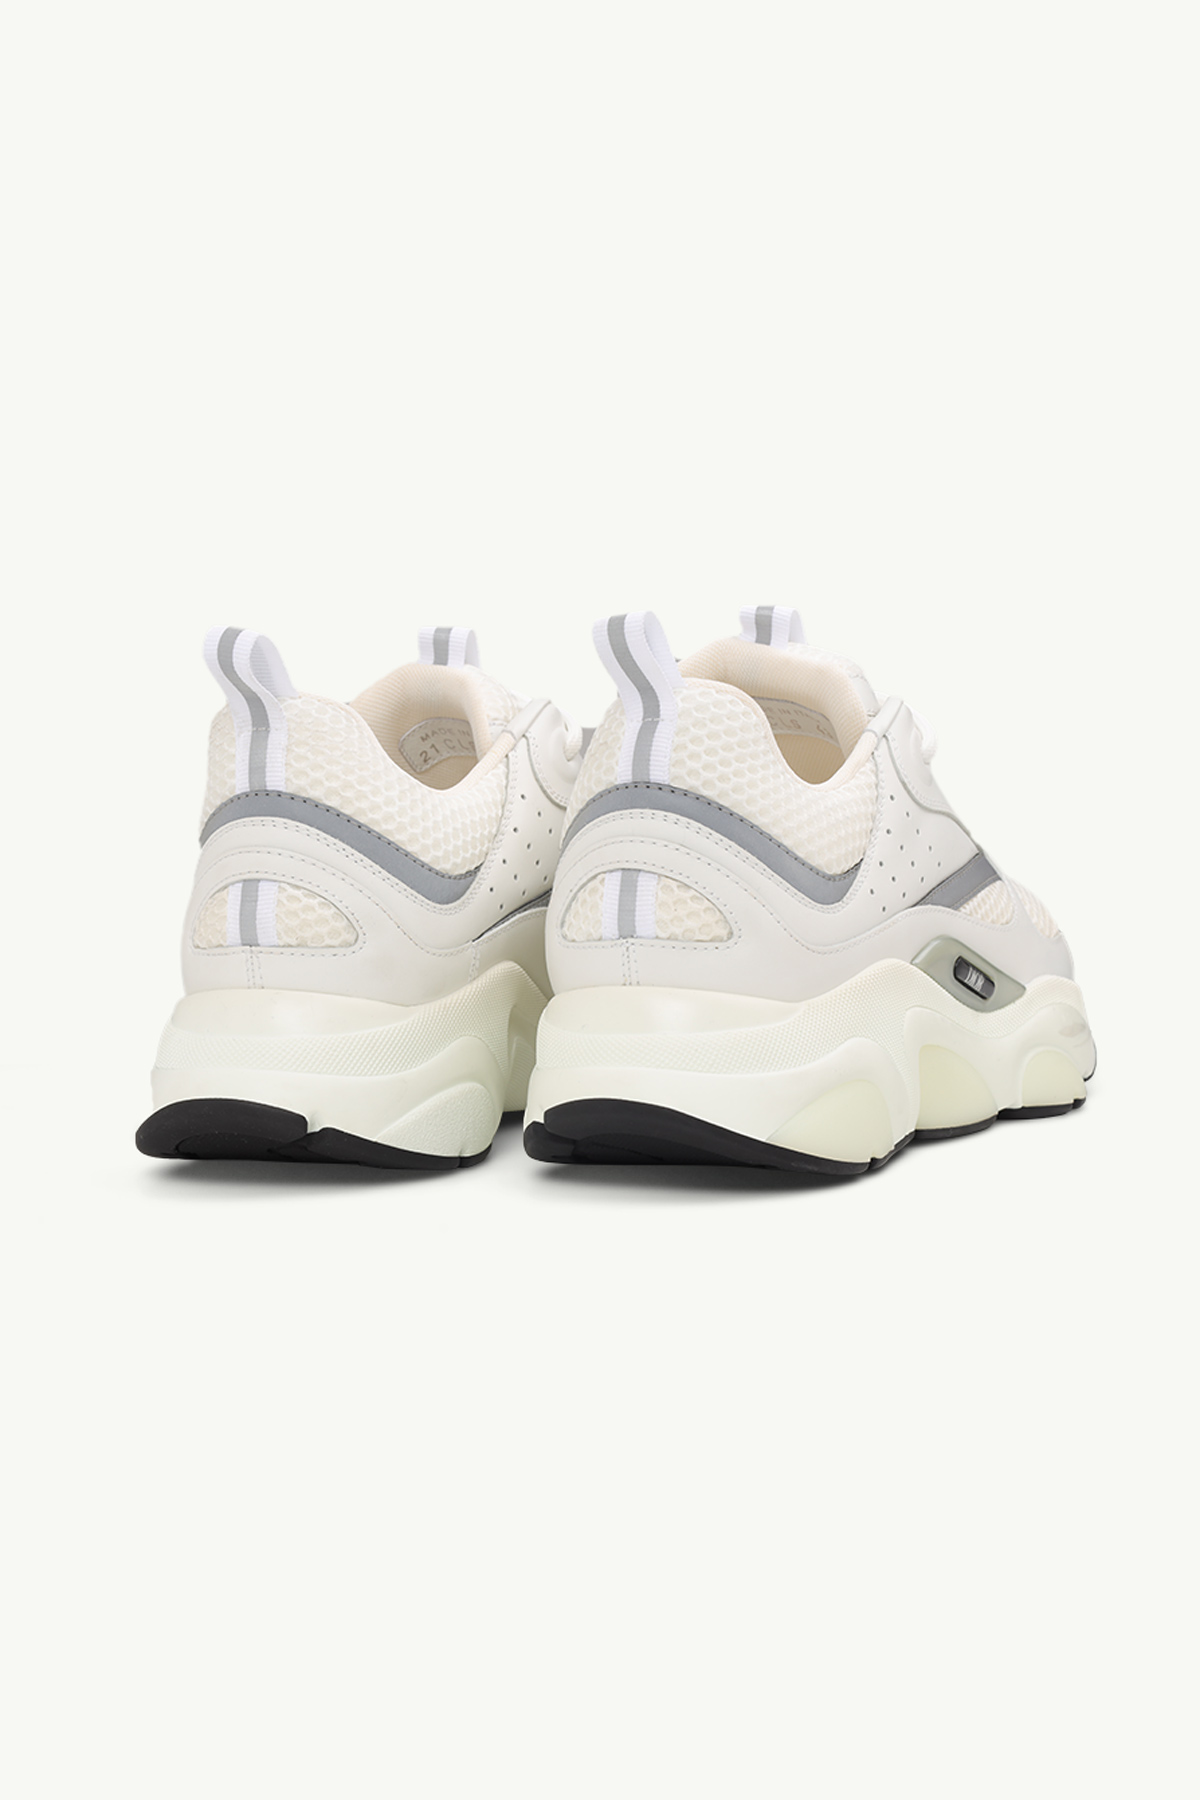 CHRISTIAN DIOR B22 Sneakers in White Technical Mesh 2